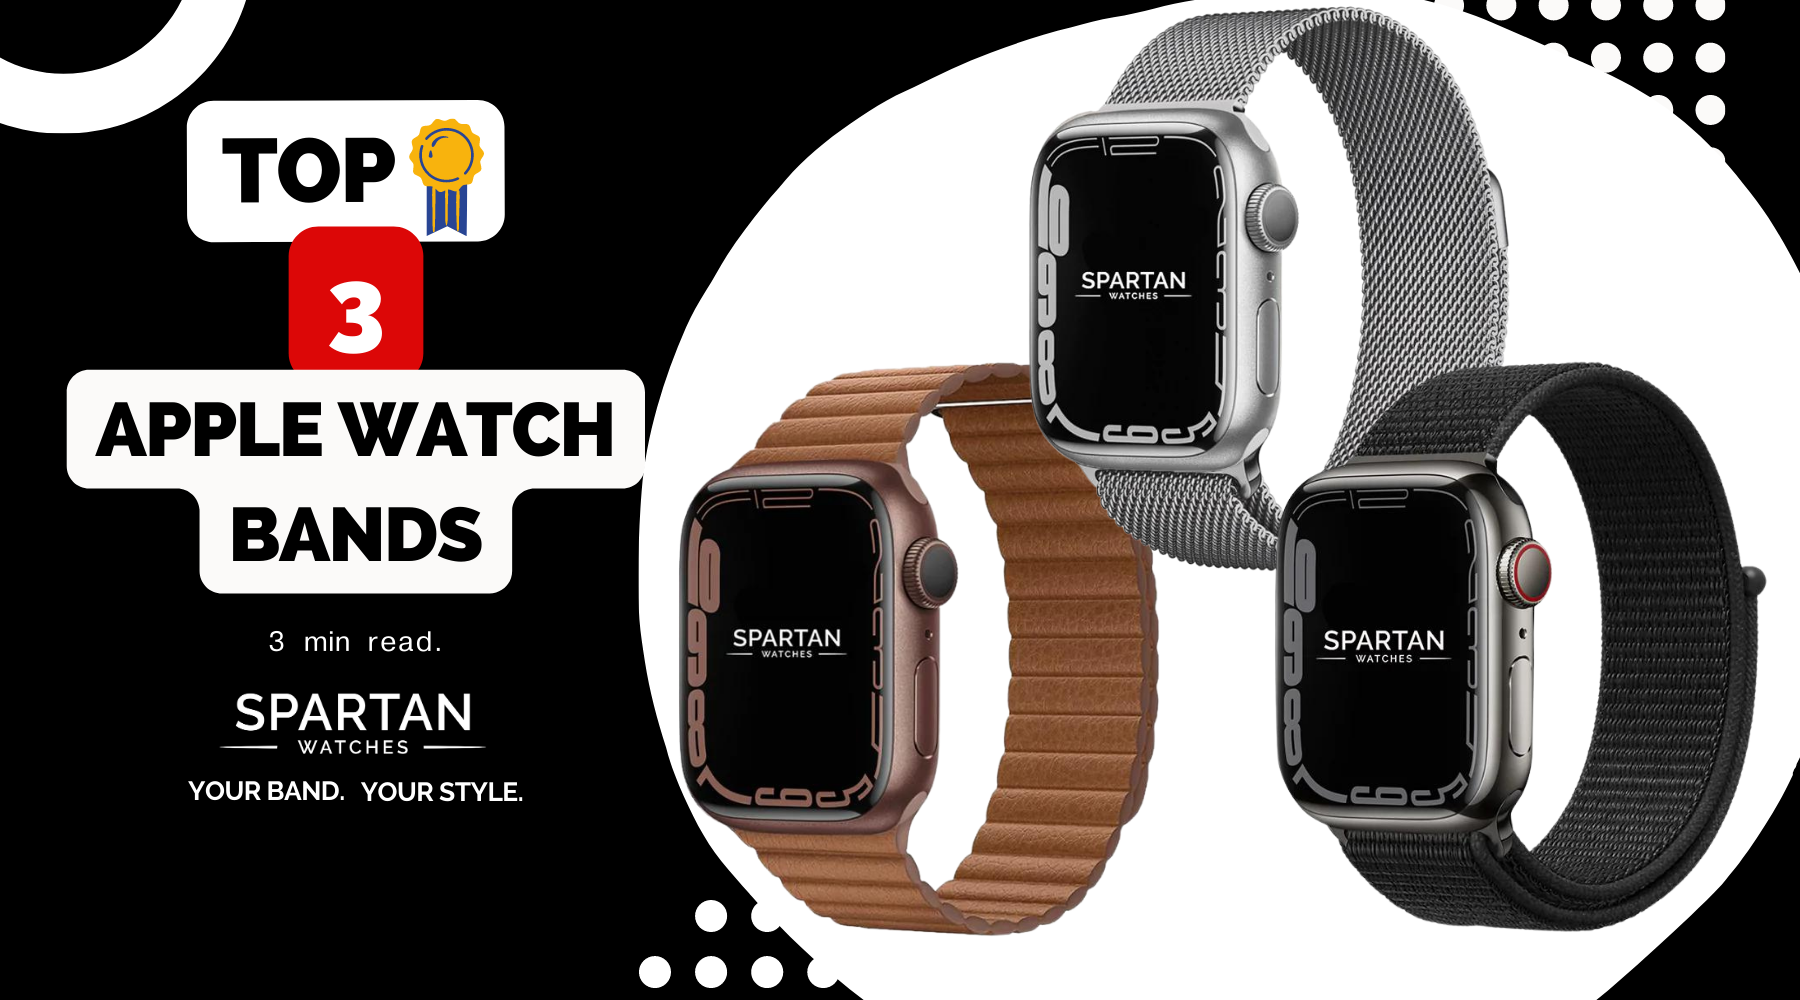 The Top 3 Apple Watch Bands – Spartan Watches